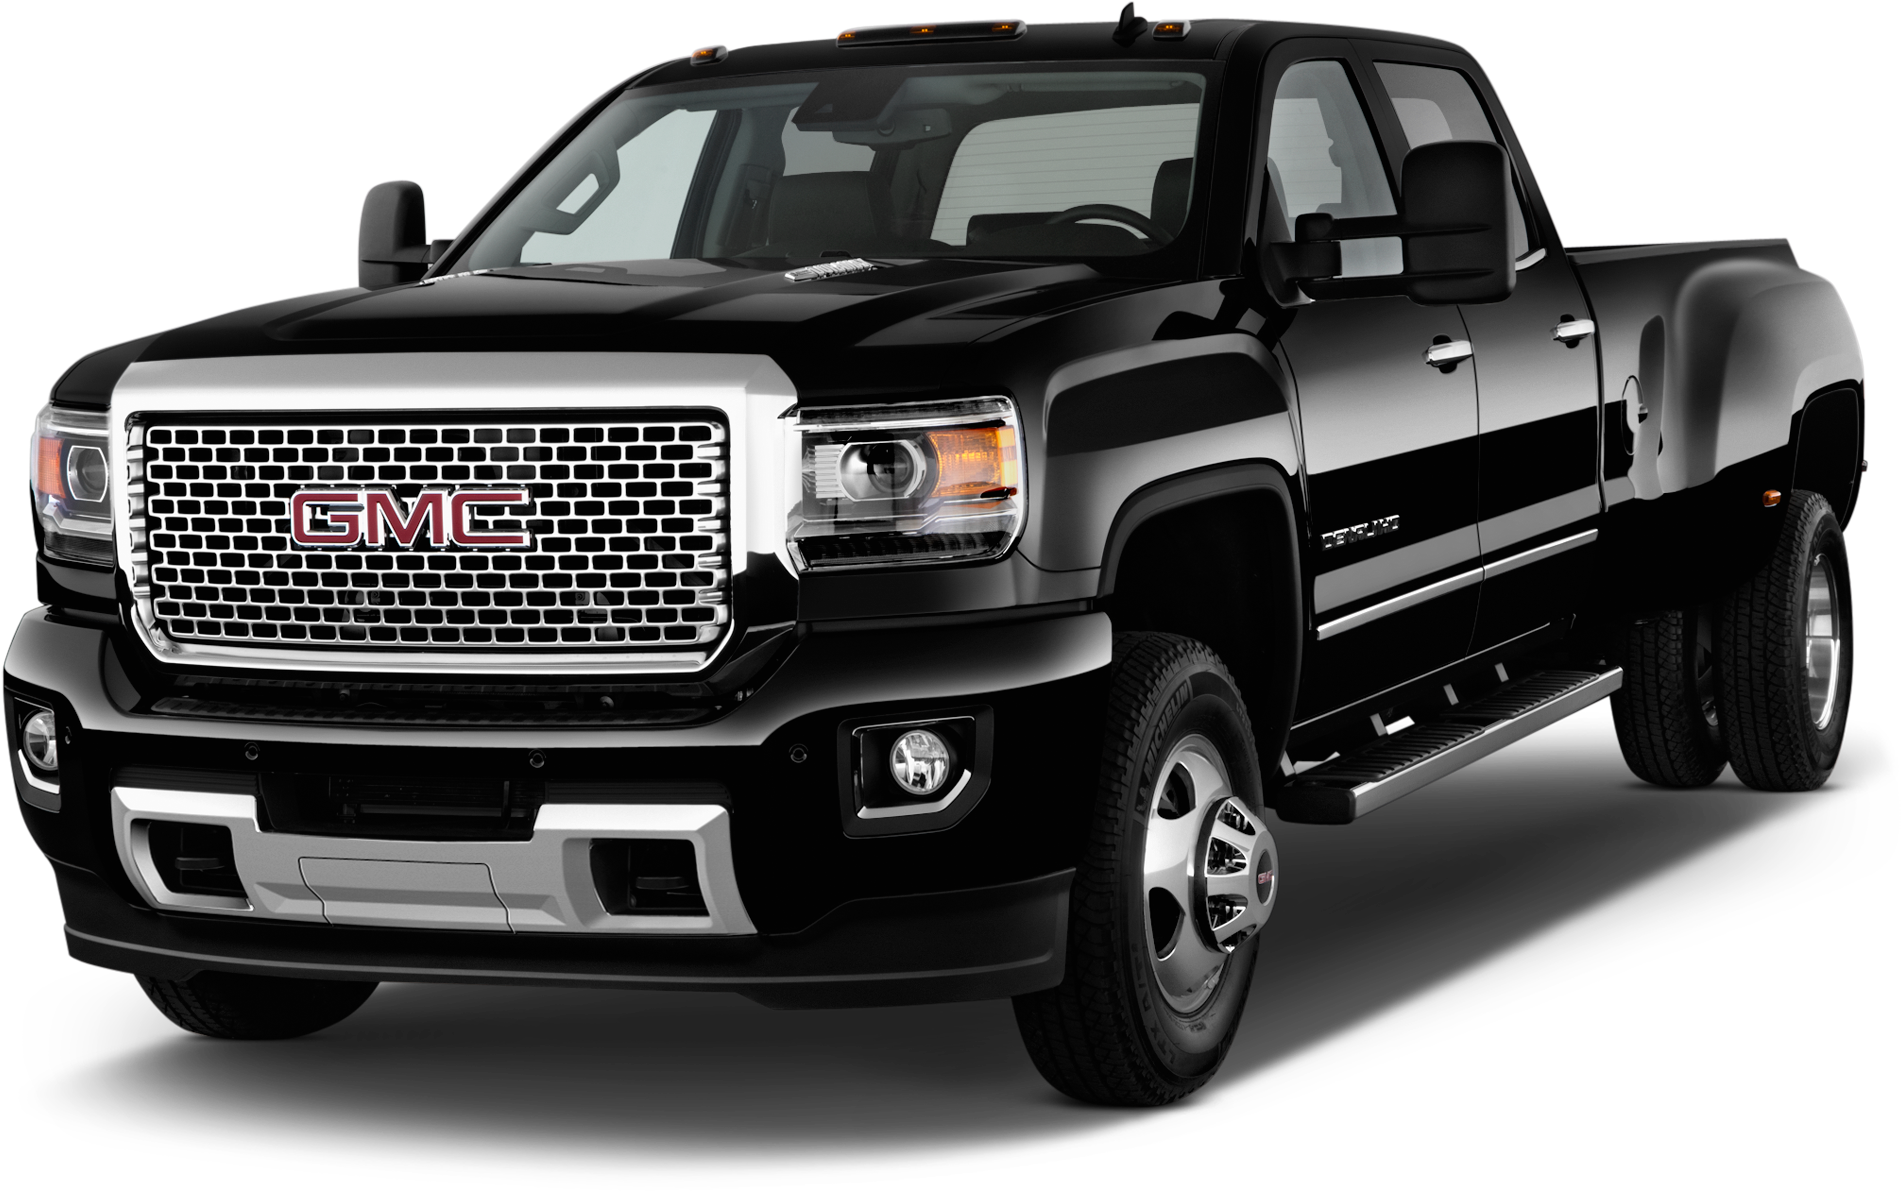 A Black Truck With Silver Grill